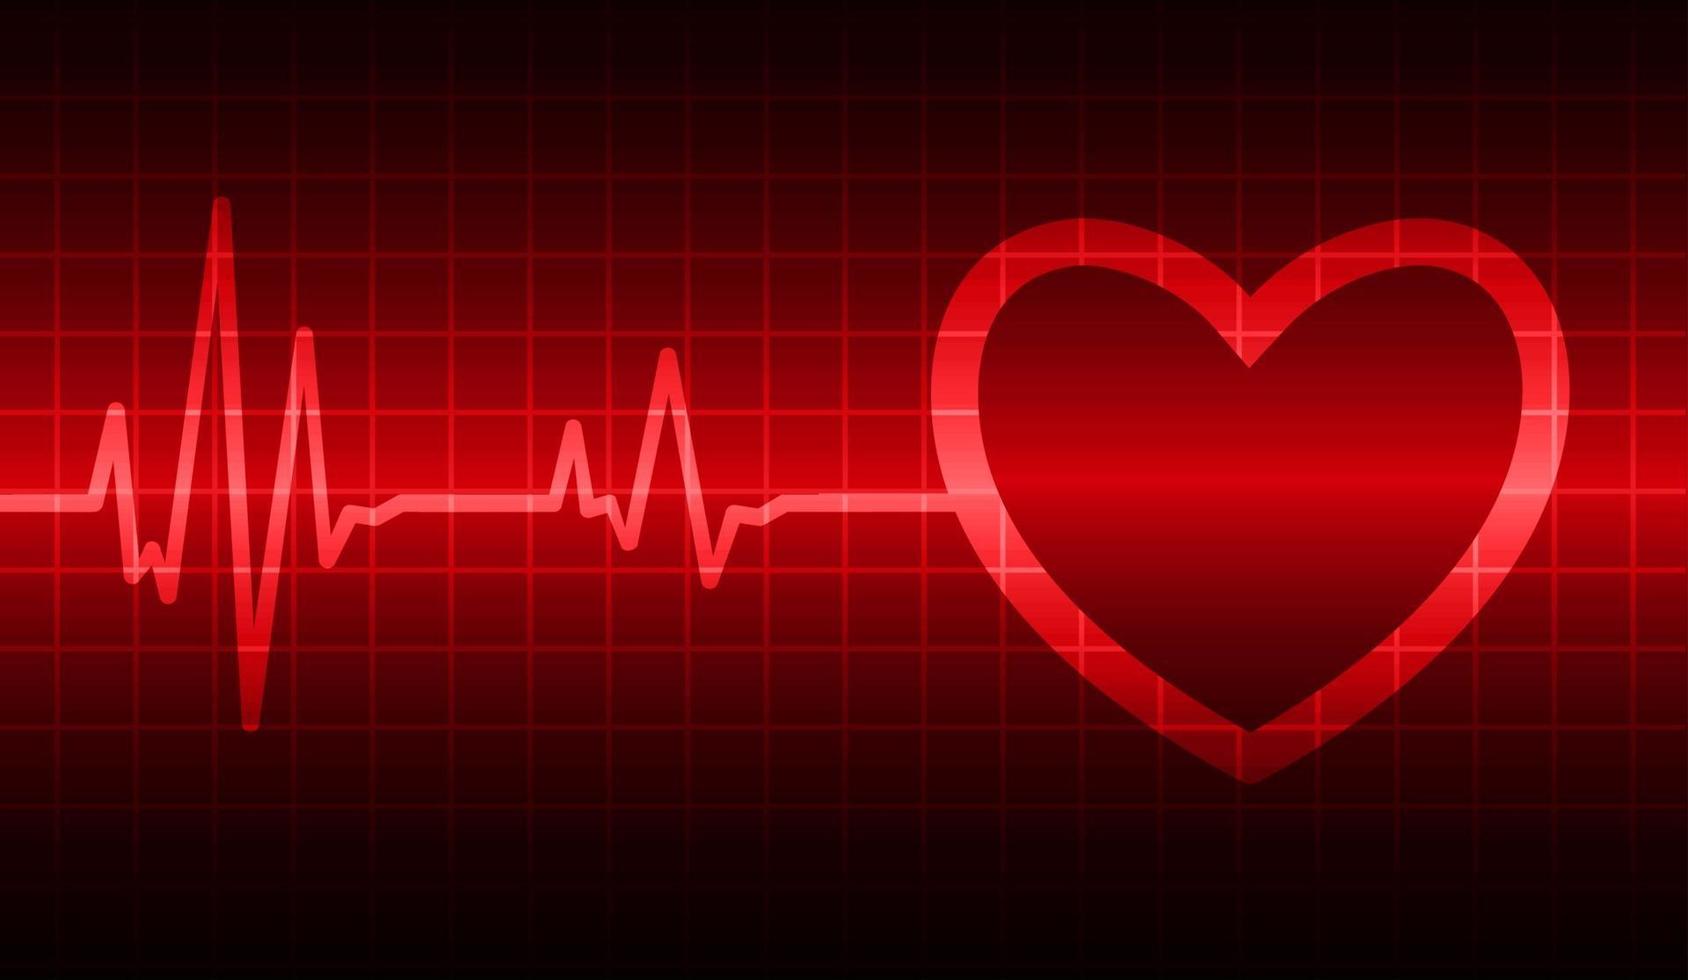 Heart pulse monitor with signal. Heart beat. EKG icon wave vector